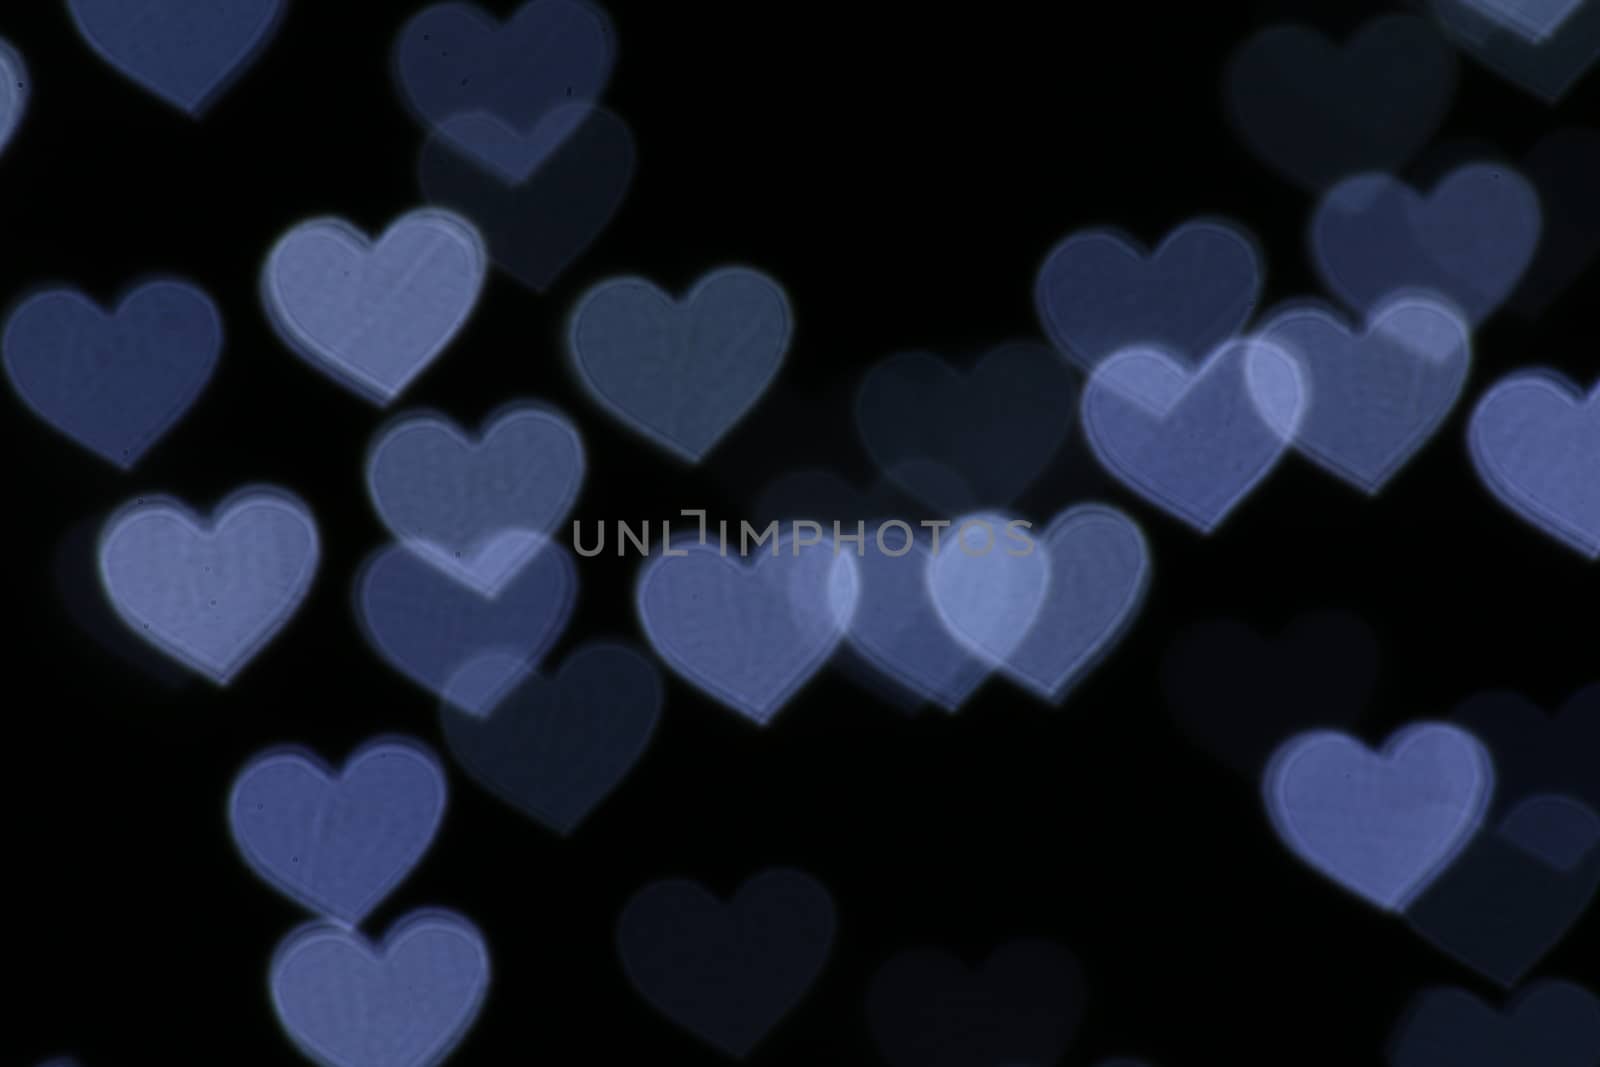 Colorful heart-shaped on black background lighting bokeh for decoration at night backdrop wallpaper blurred valentine, Love Pictures background, Lighting heart shaped soft at night abstract by cgdeaw